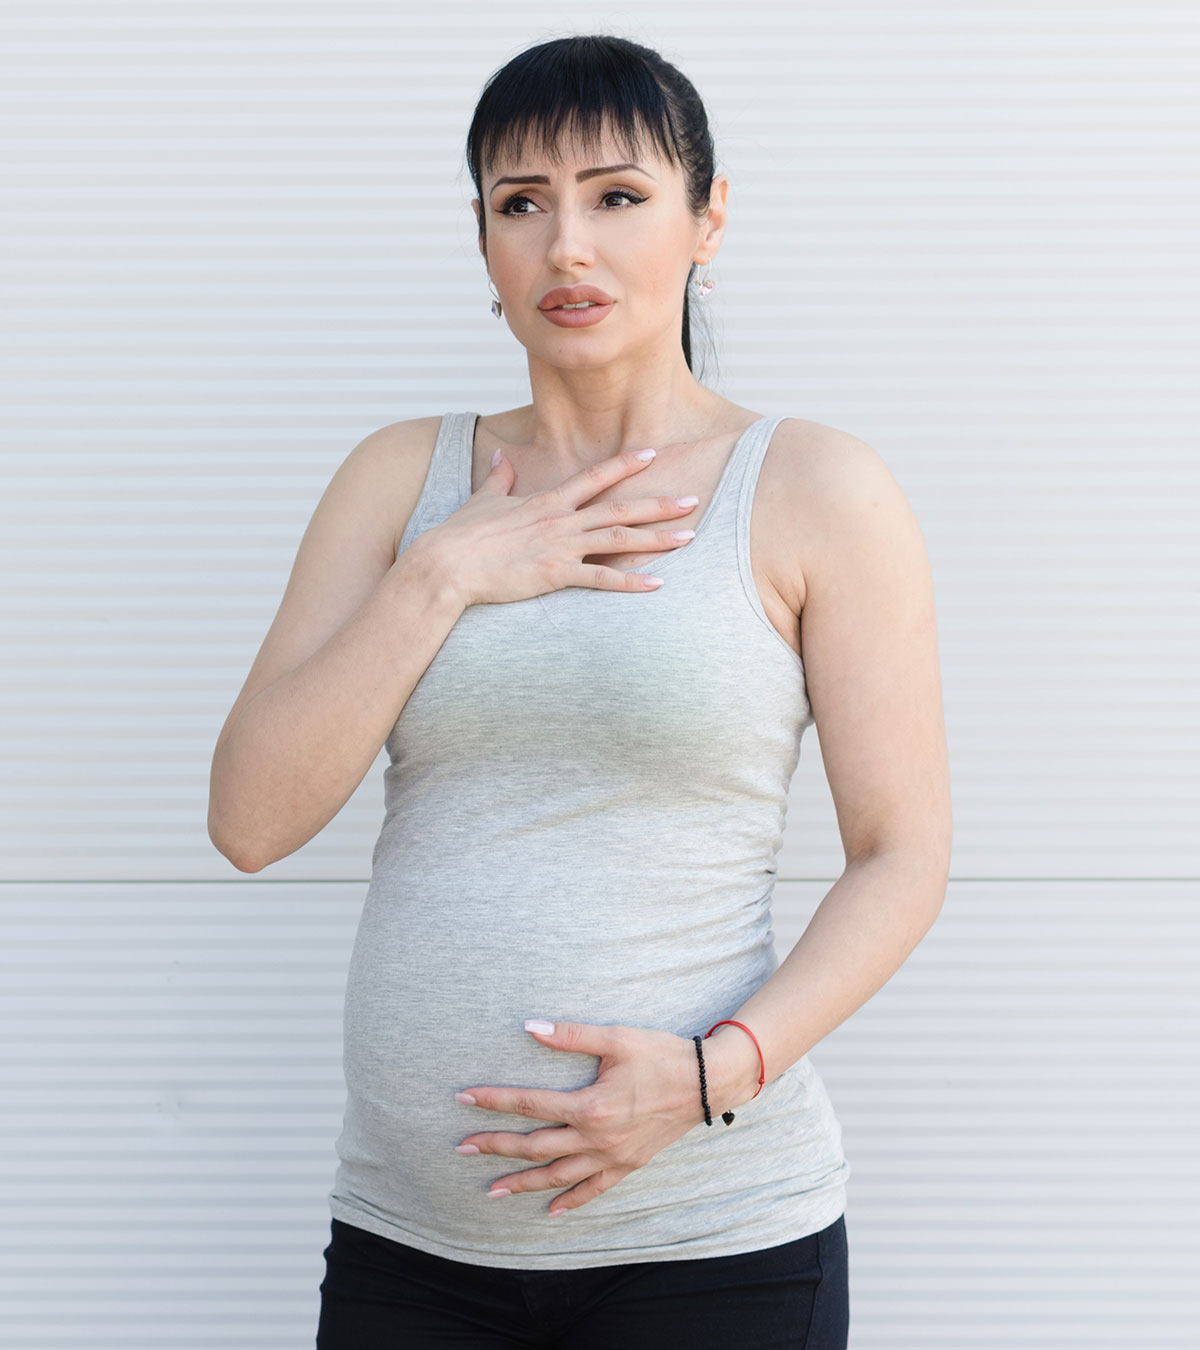 Shortness Of Breath During Pregnancy: Causes And Remedies